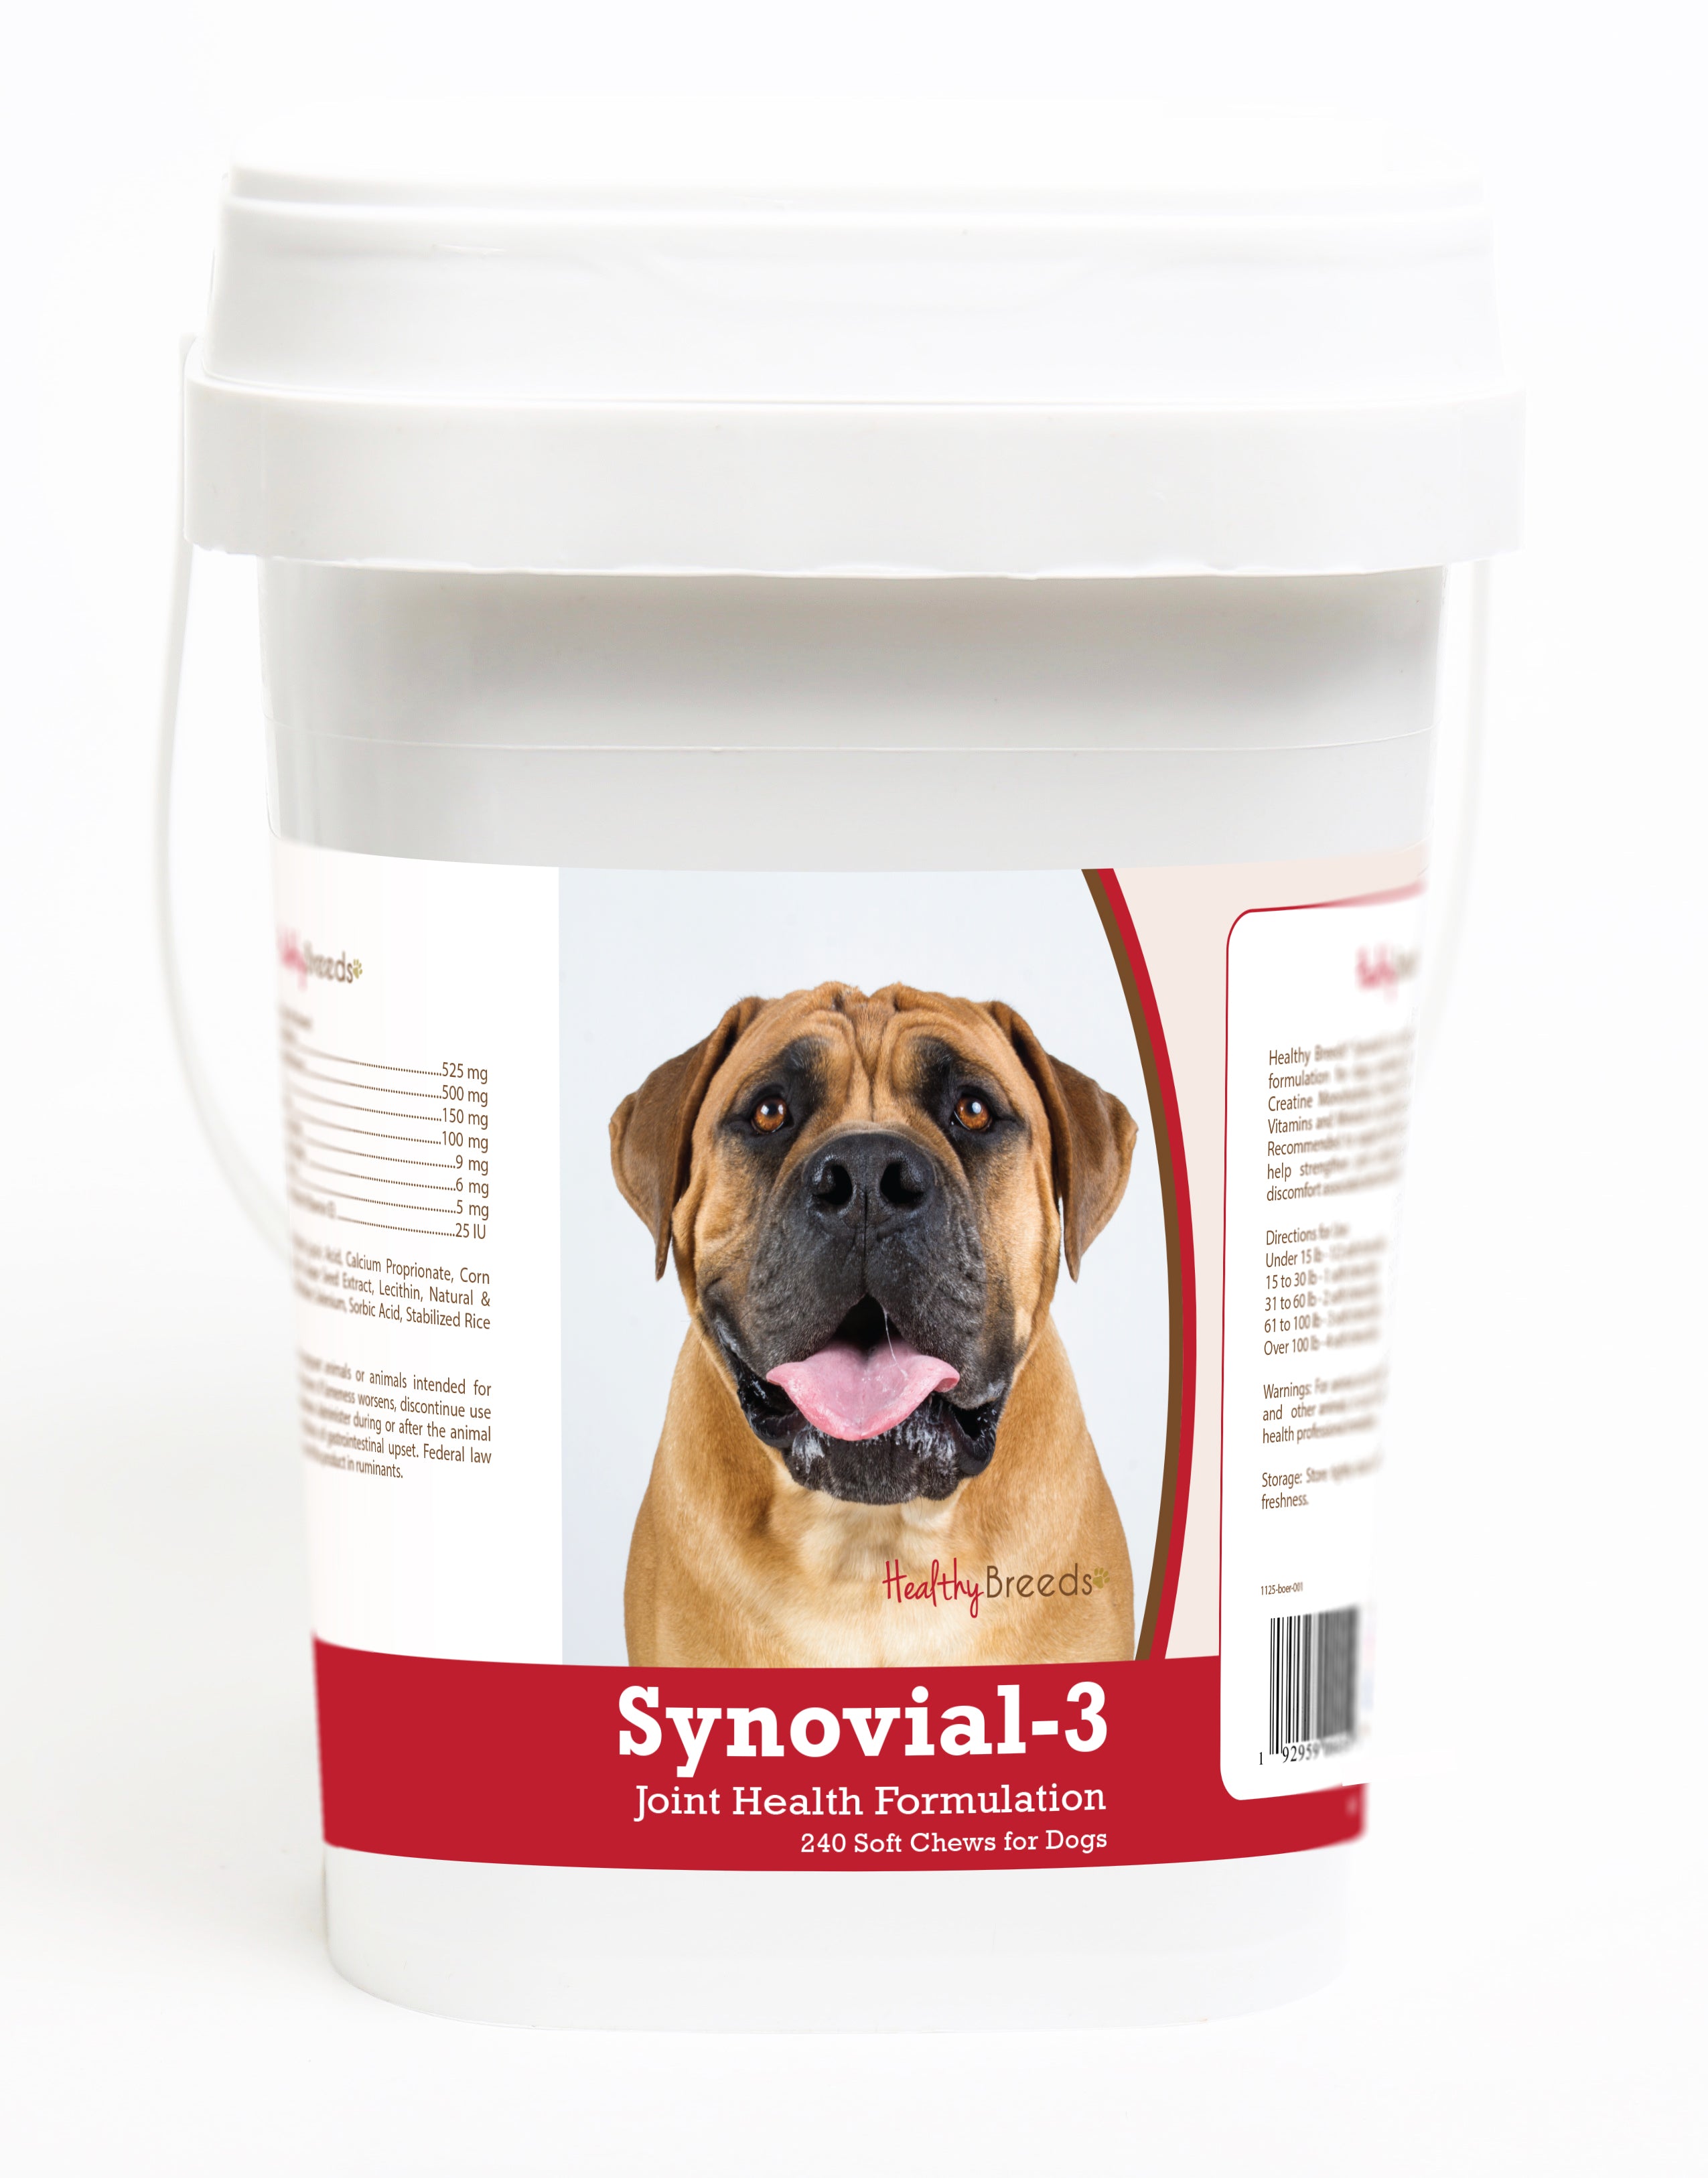 Boerboel Synovial-3 Joint Health Formulation Soft Chews 240 Count